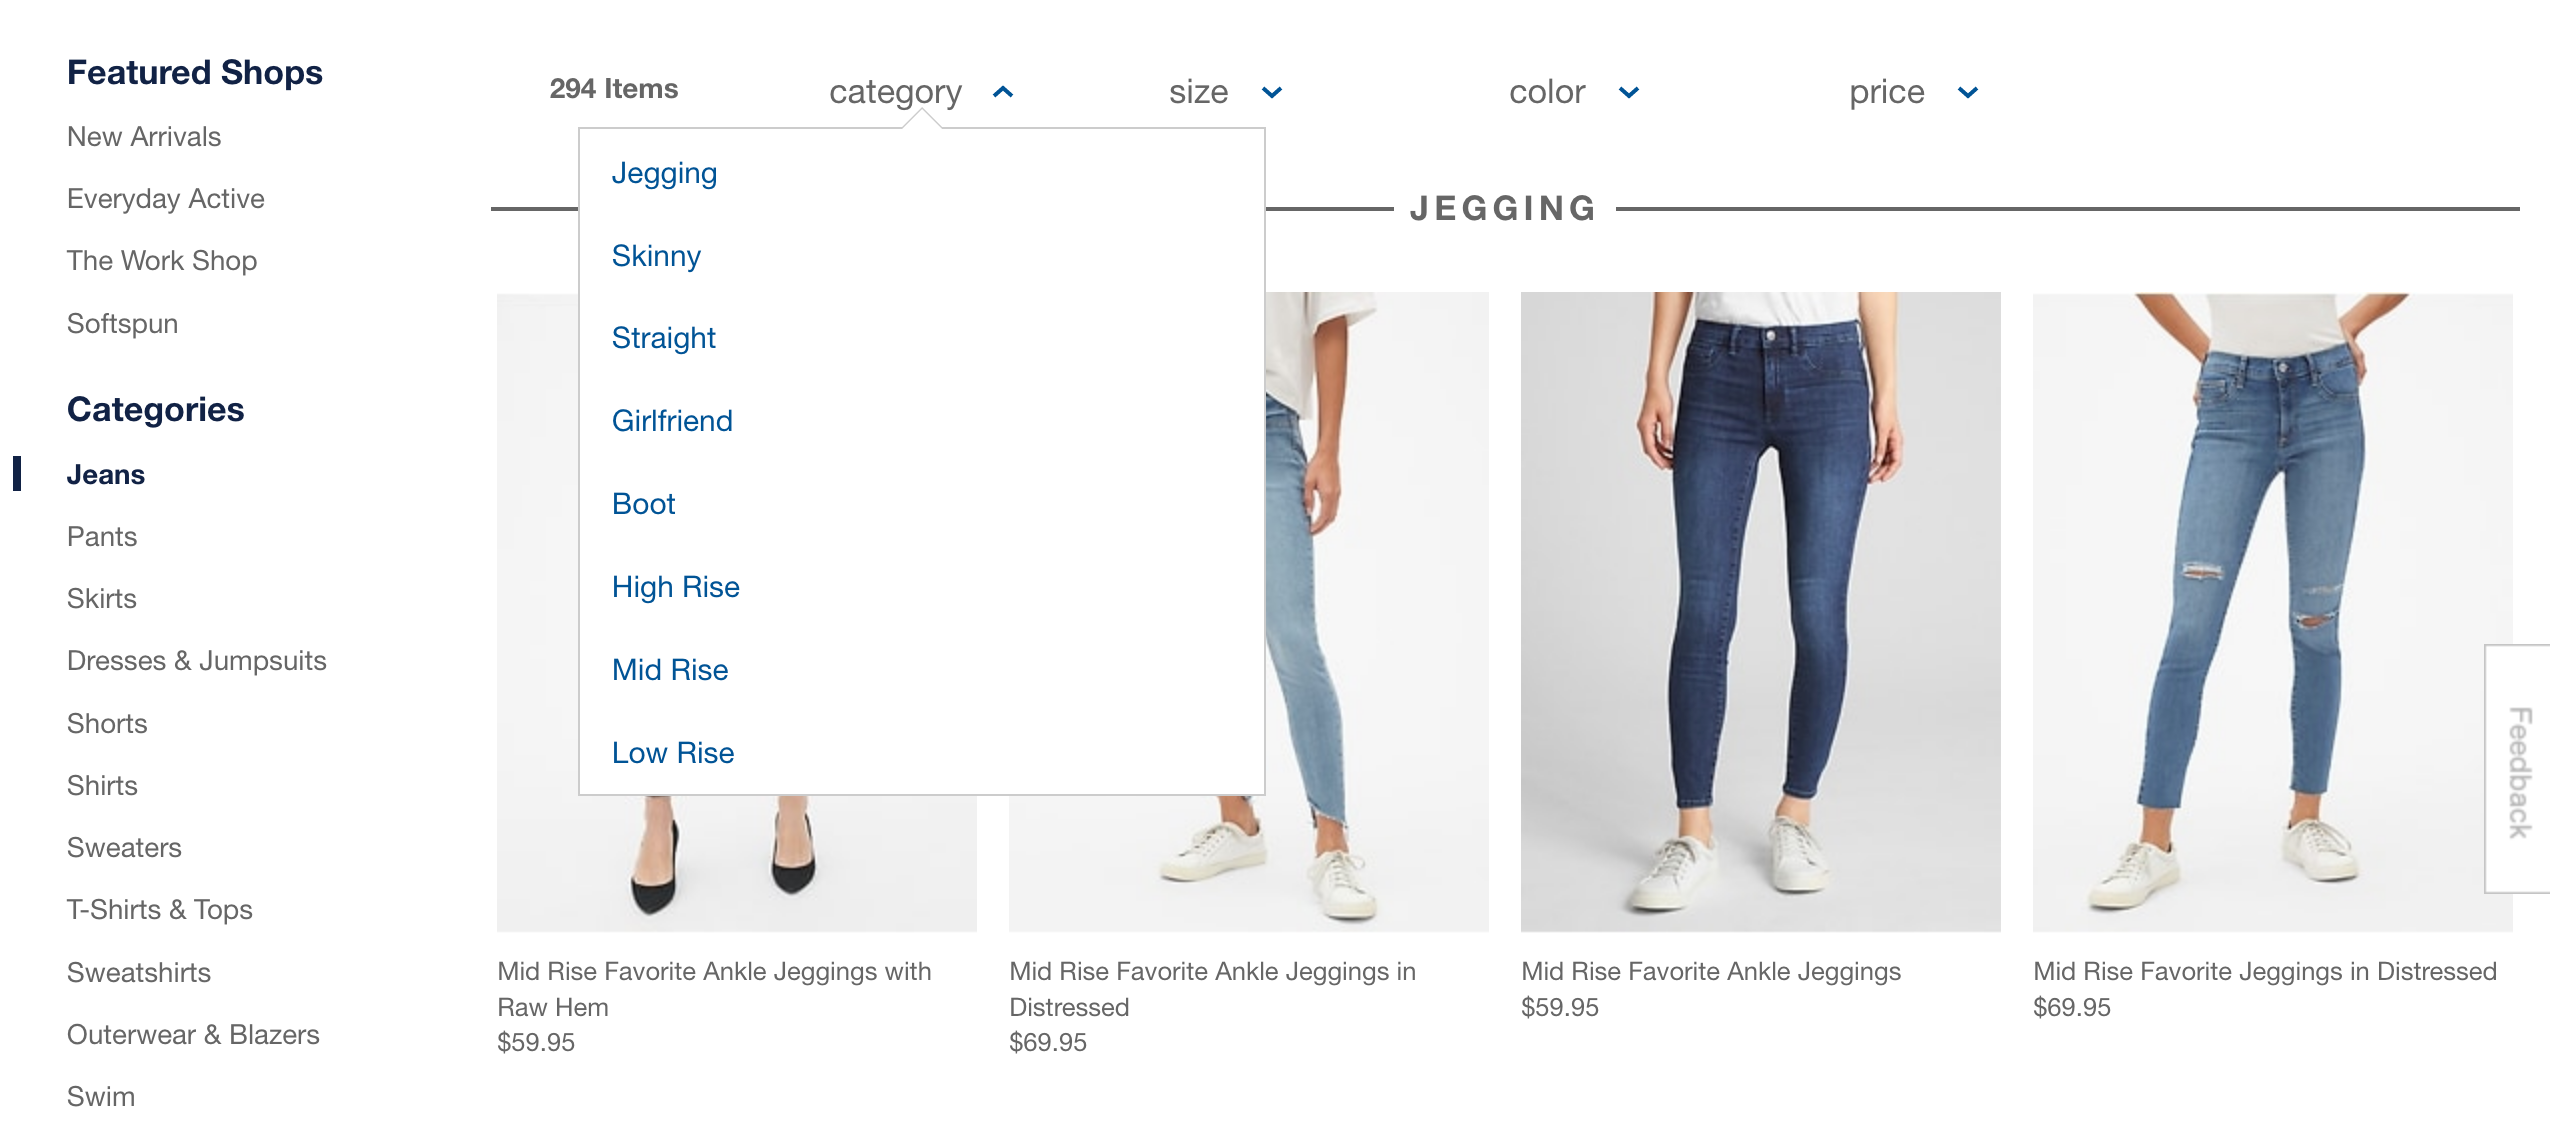 gap shopify filter menu example | shopify filter search results